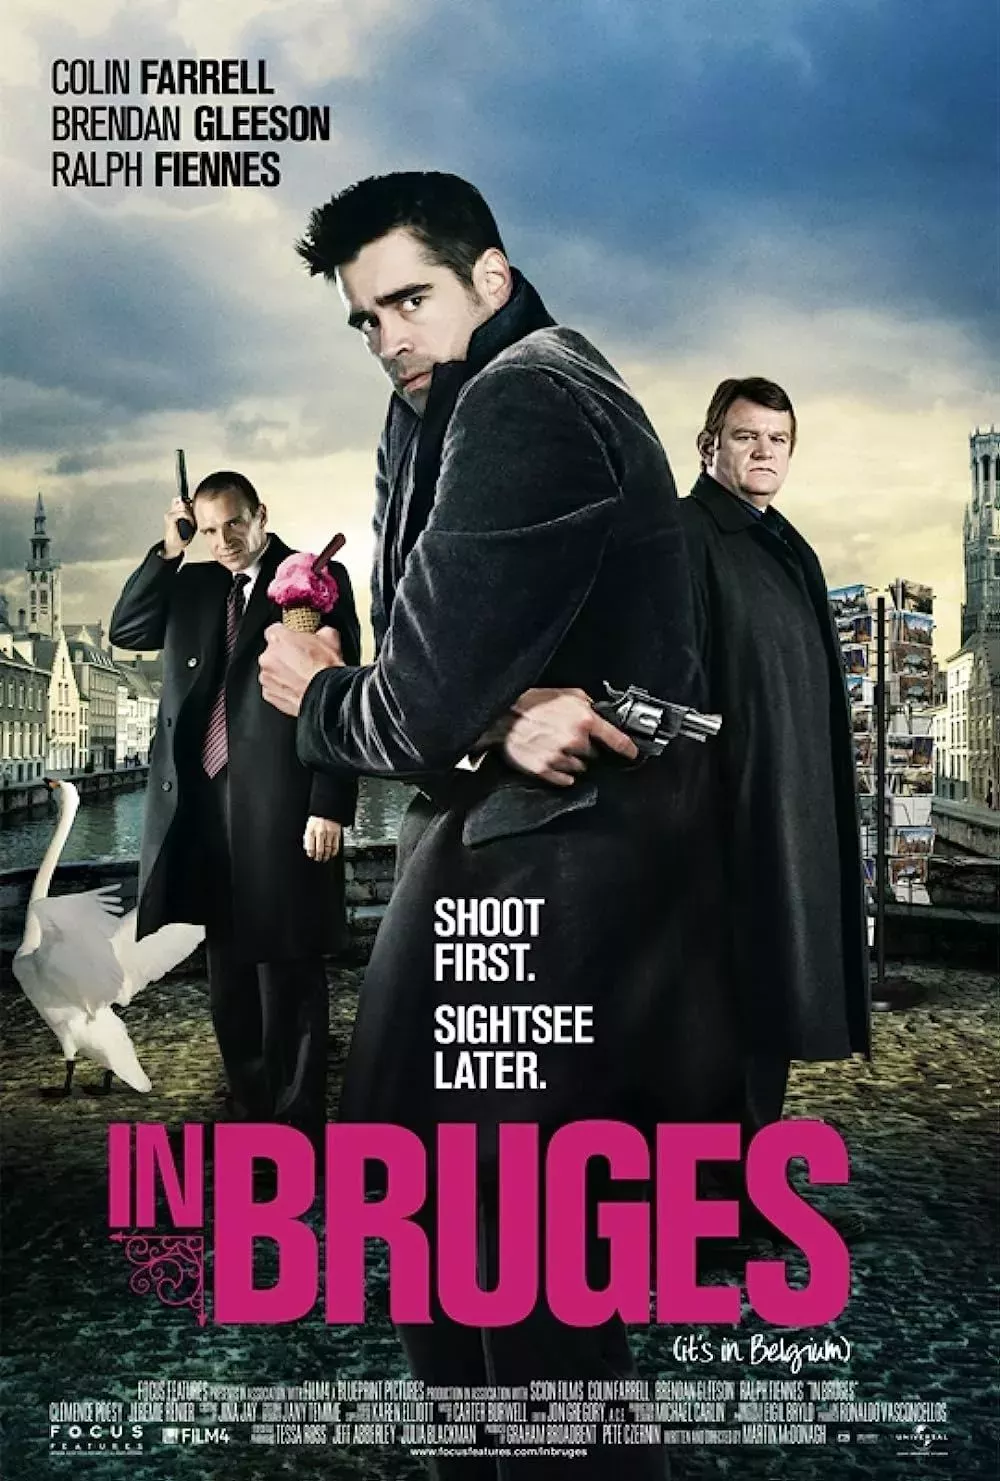 Colin Farrell, Brendan Gleeson and Ralph Fiennes in In Bruges